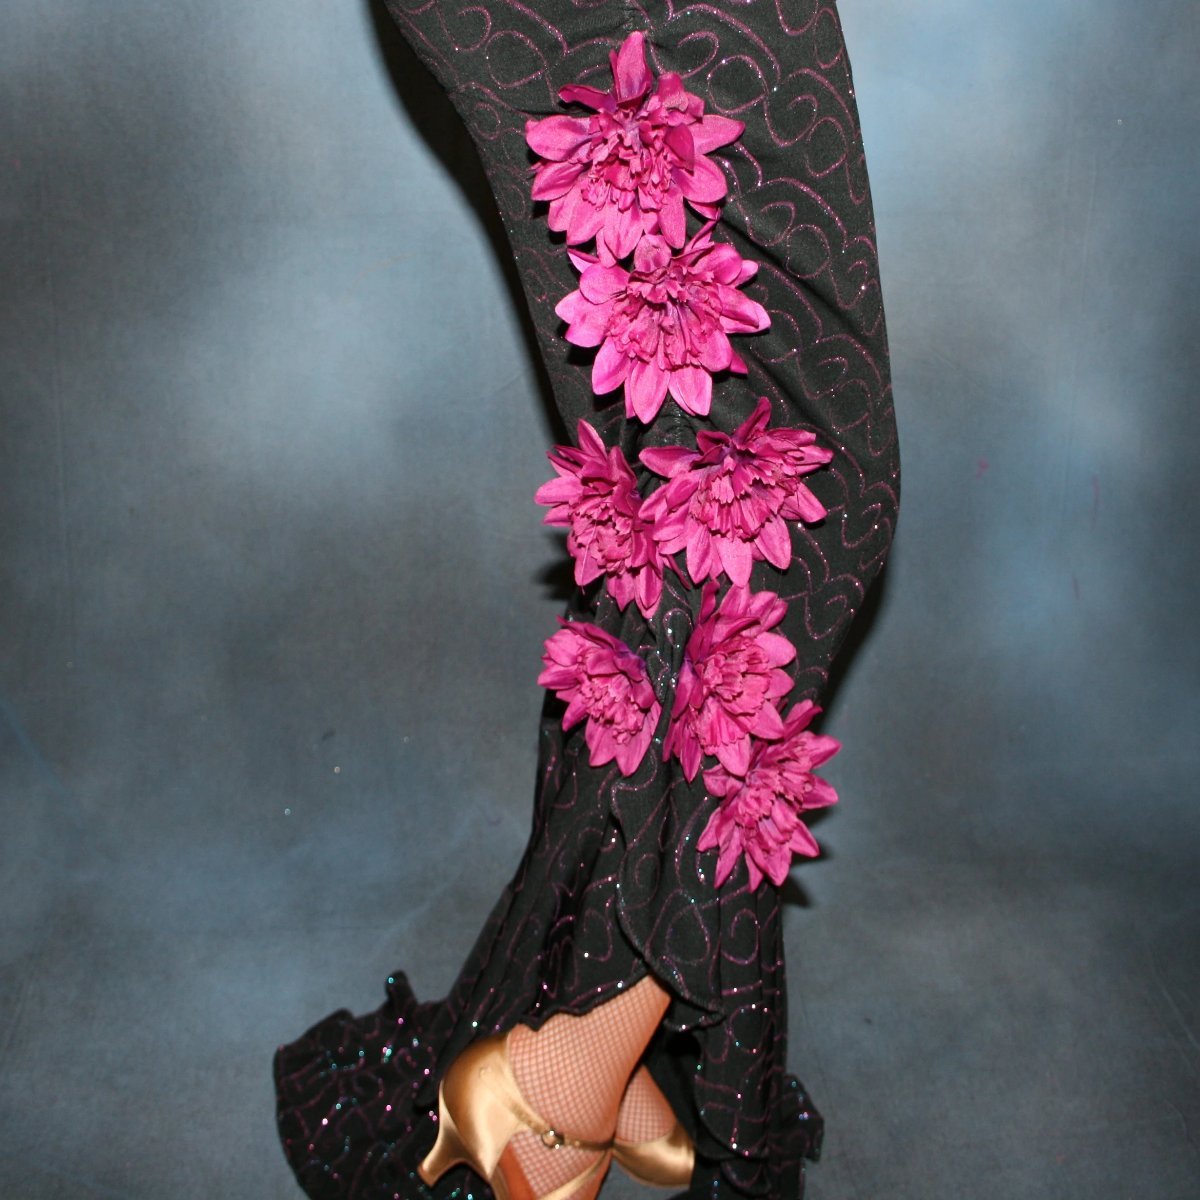 Crystal's Creations close up lower view of Black slinky glitterknit tango dress with glitter scroll design in fuchsia & blue has sleek lines with ruching… embellished with fuschia silk flowers on shoulder & at lower hip & slit in skirt. A fuchsia Swarovski rhinestone is embedded in each flower…stunning on the dance floor!